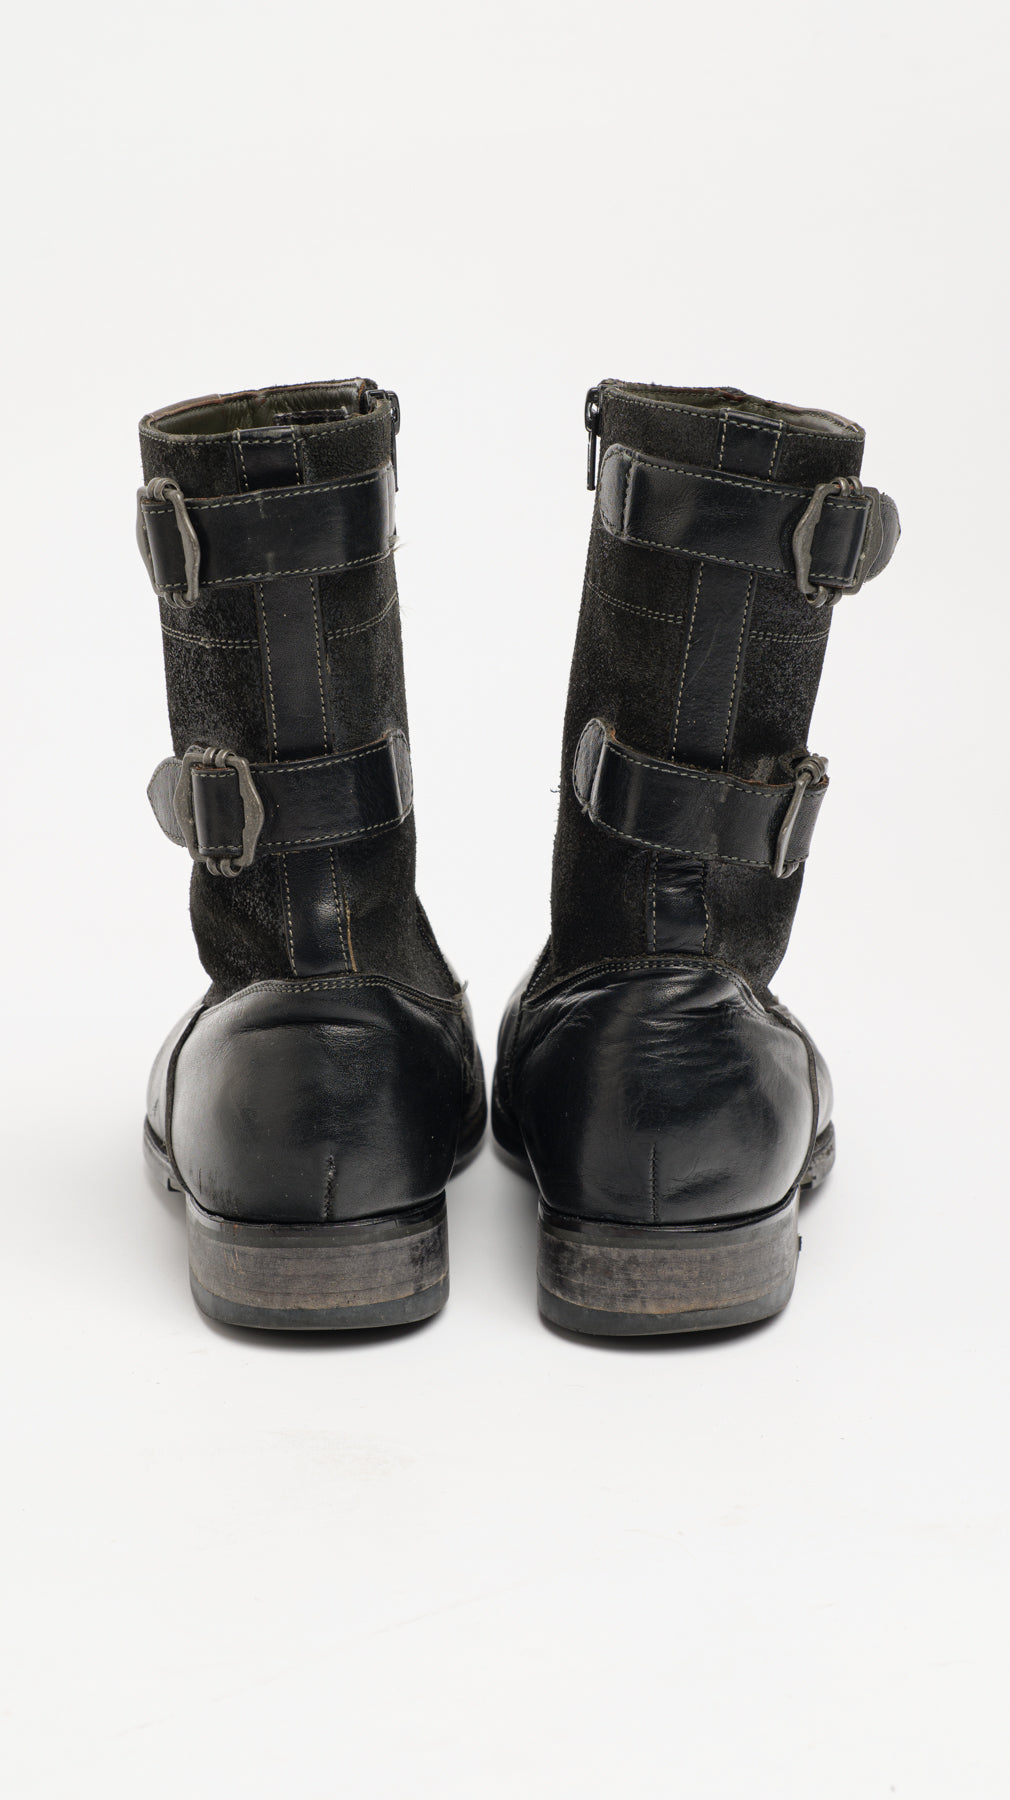 G-STAR TACTICAL MILITARY BOOTS